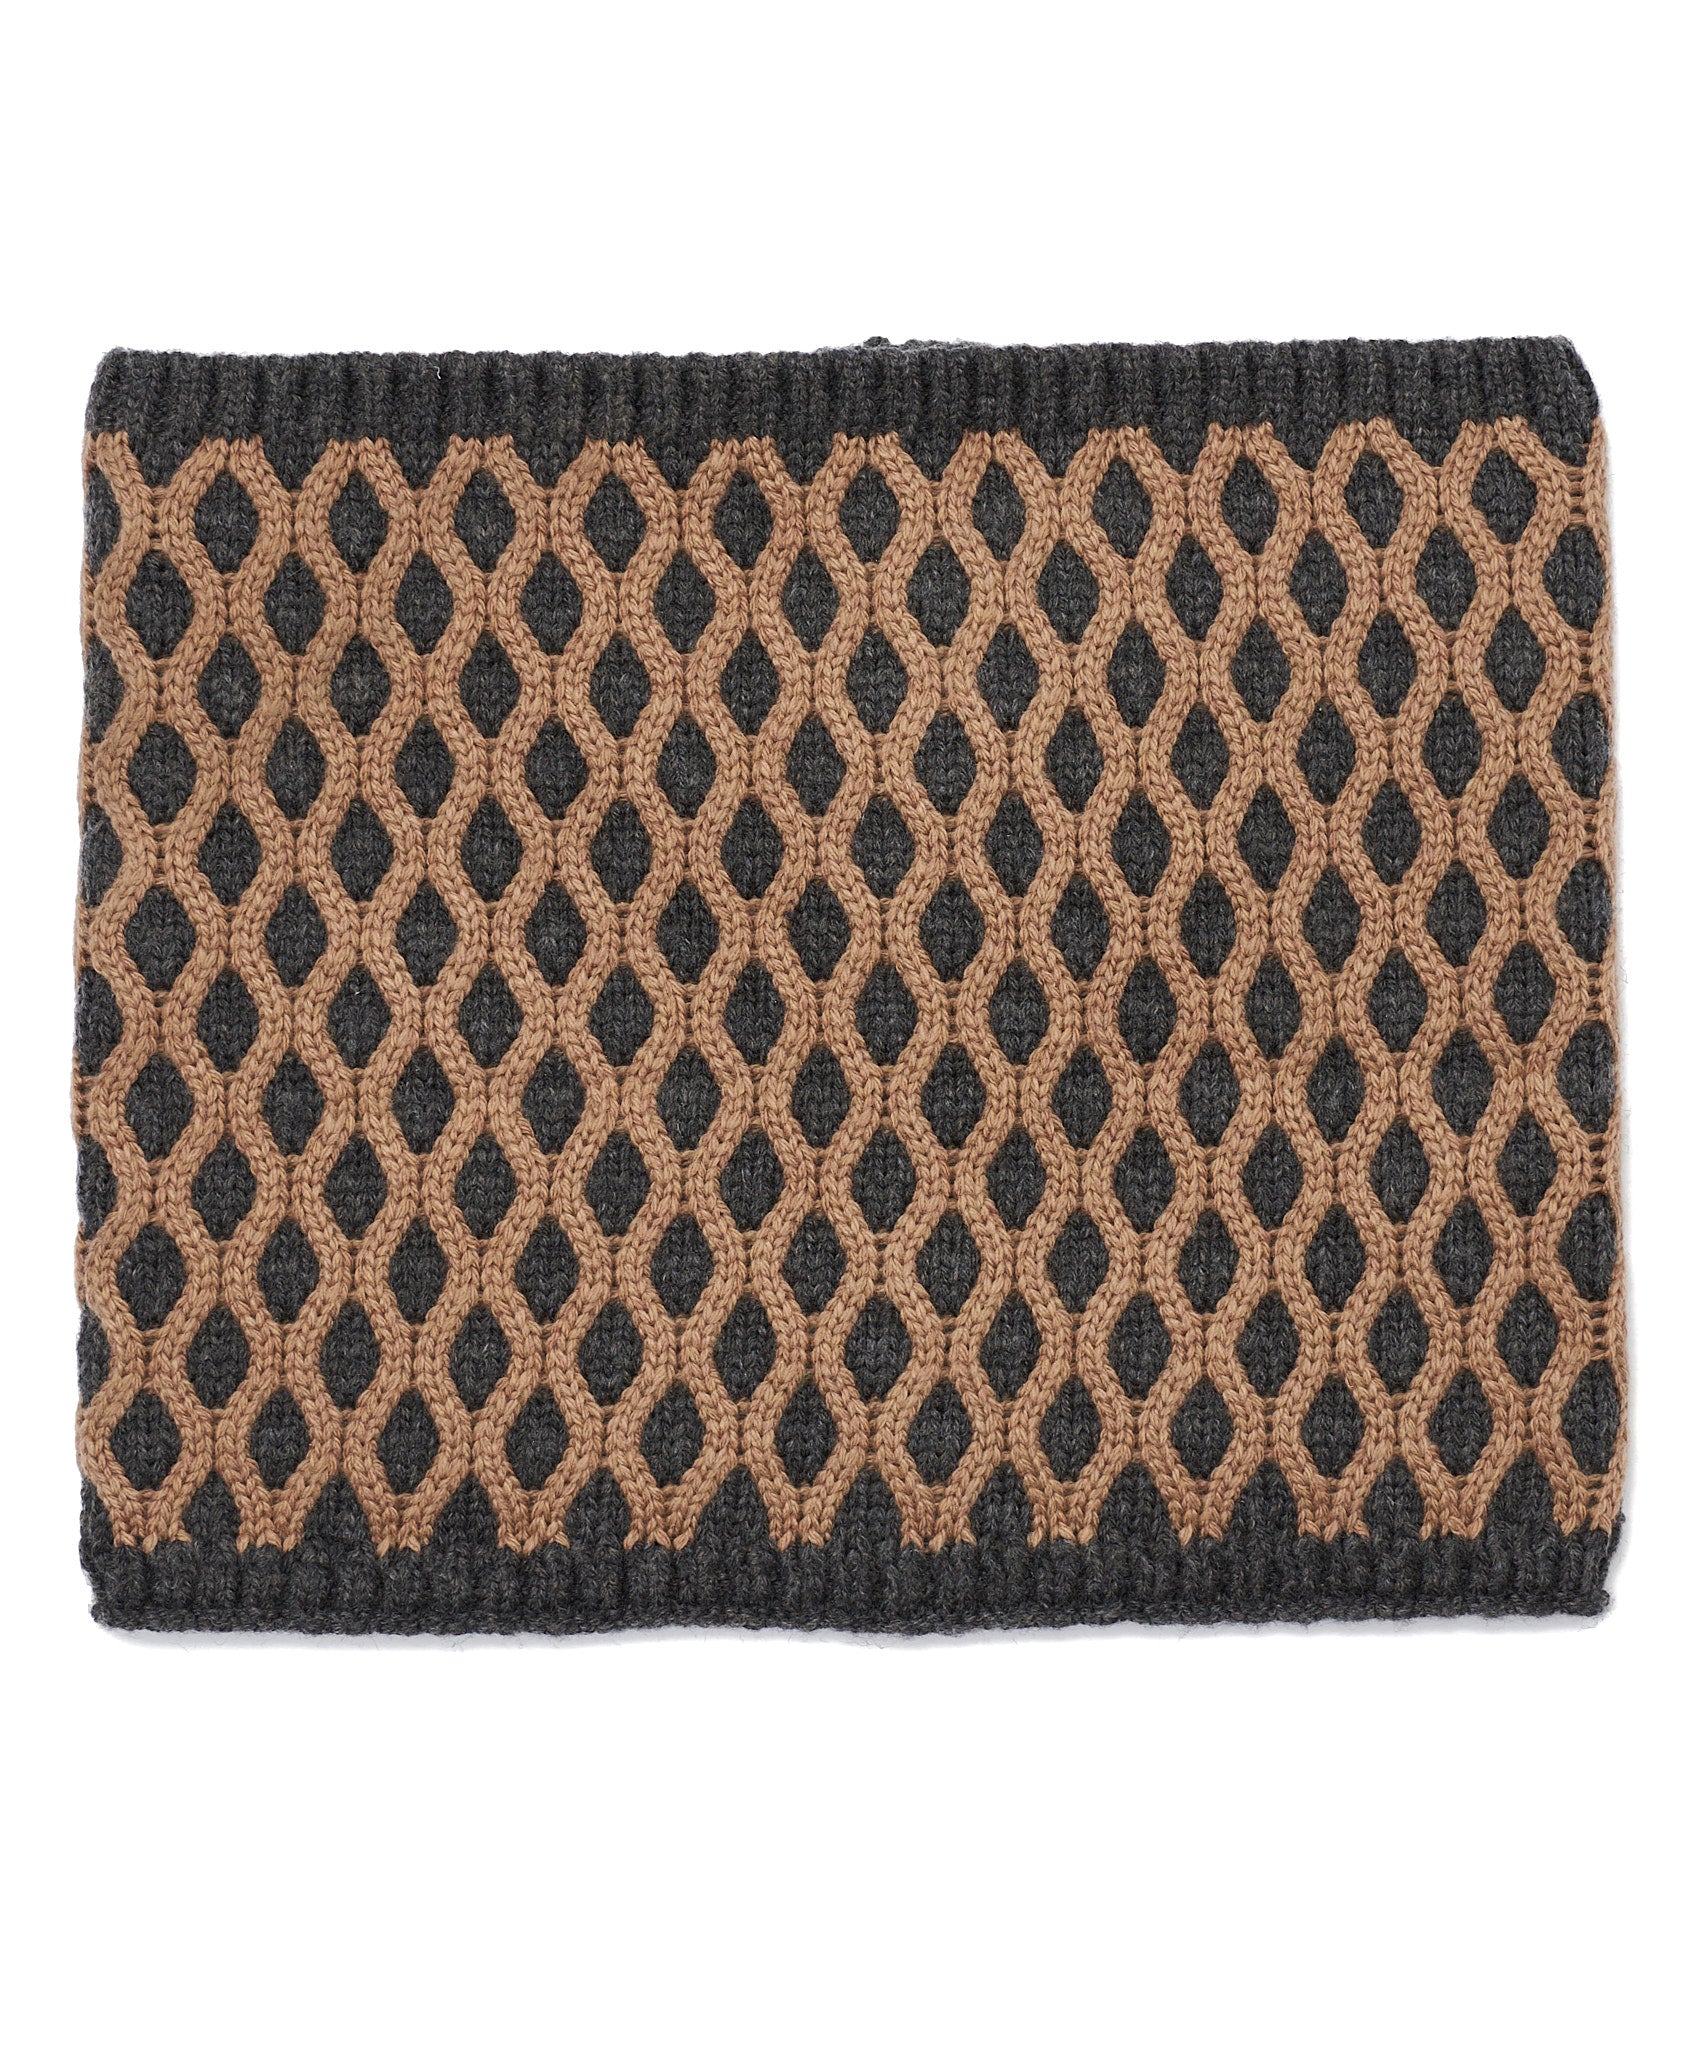 Recycled Bi-color Honeycomb Neck Warmer in color Charcoal